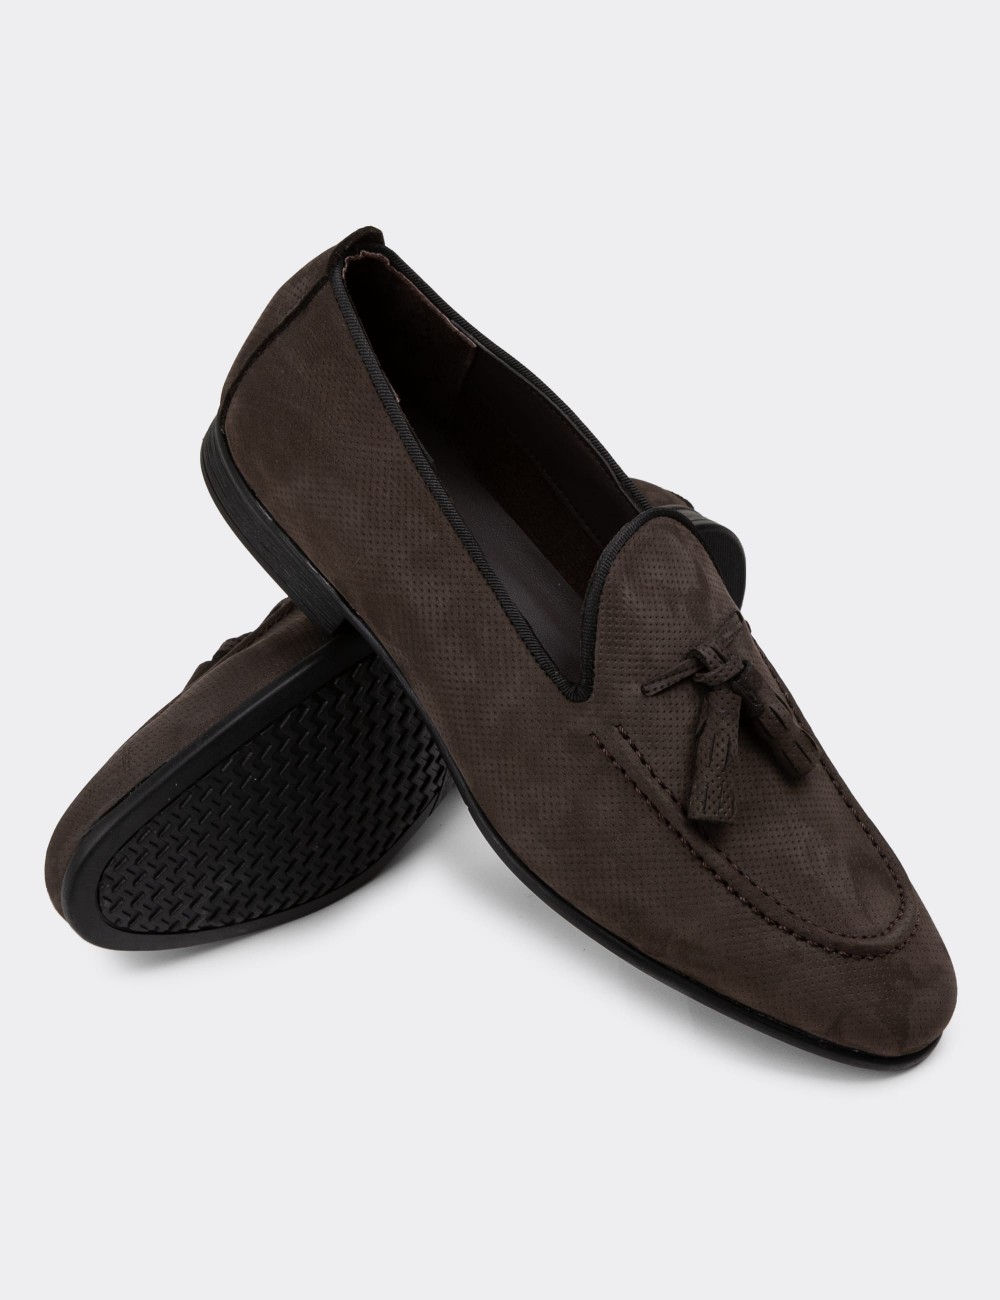 Tan Suede Leather Loafers - 01701MFUMC01